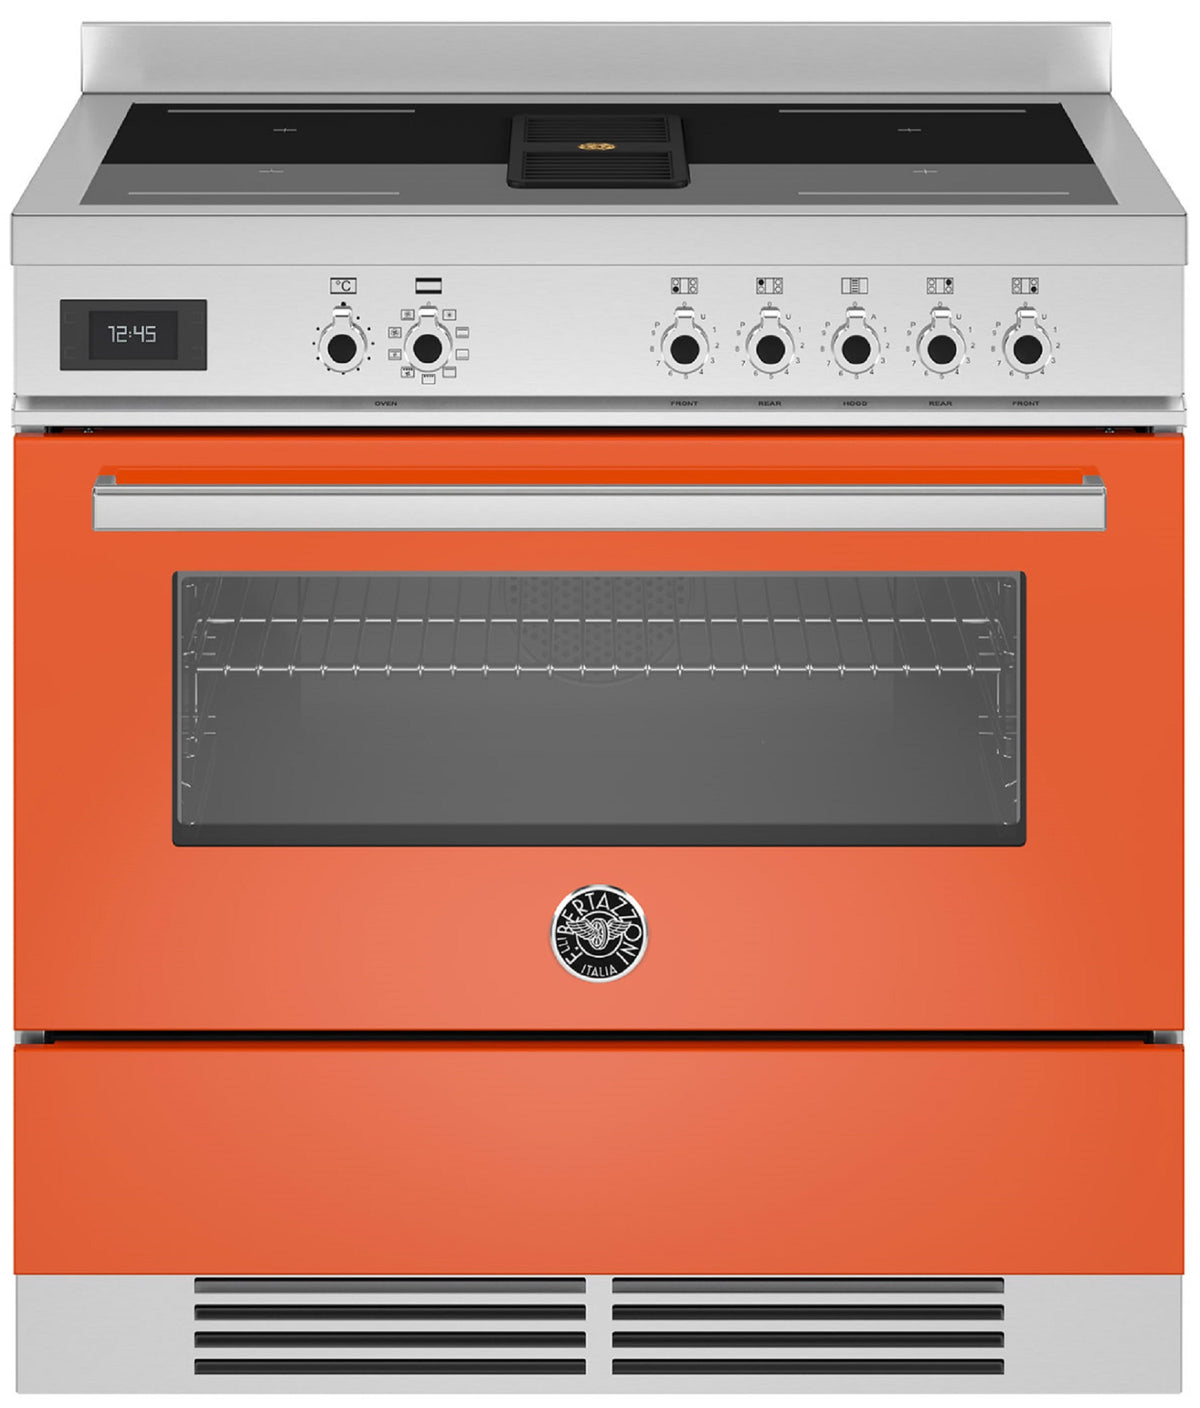 BERTAZZONI PROCH94I1EART 90cm Electric Oven 5 Zone Induction Hob with in-built Extractor Range Cooker in Orange